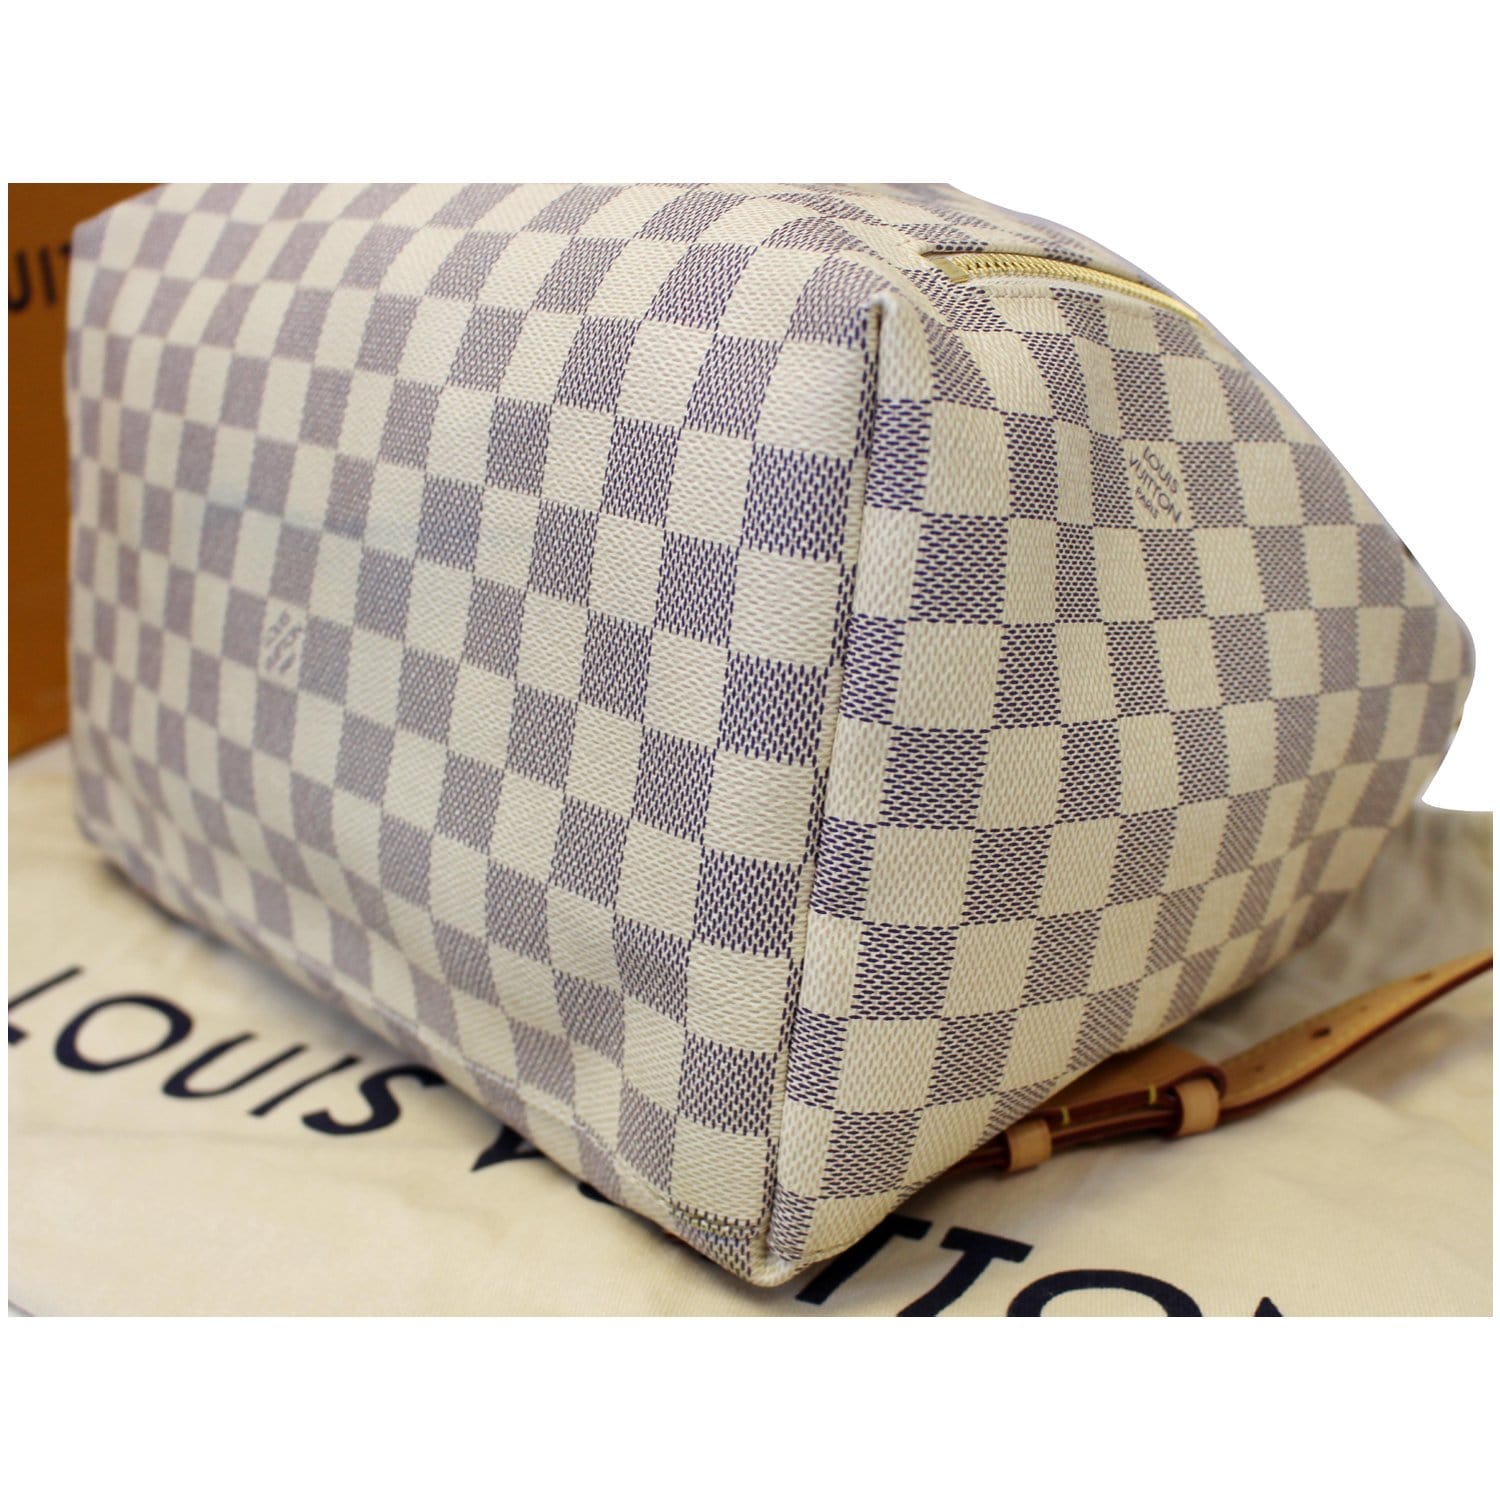 Louis Vuitton Sperone Backpack, Damier Azur, Preowned in Dustbag WA001